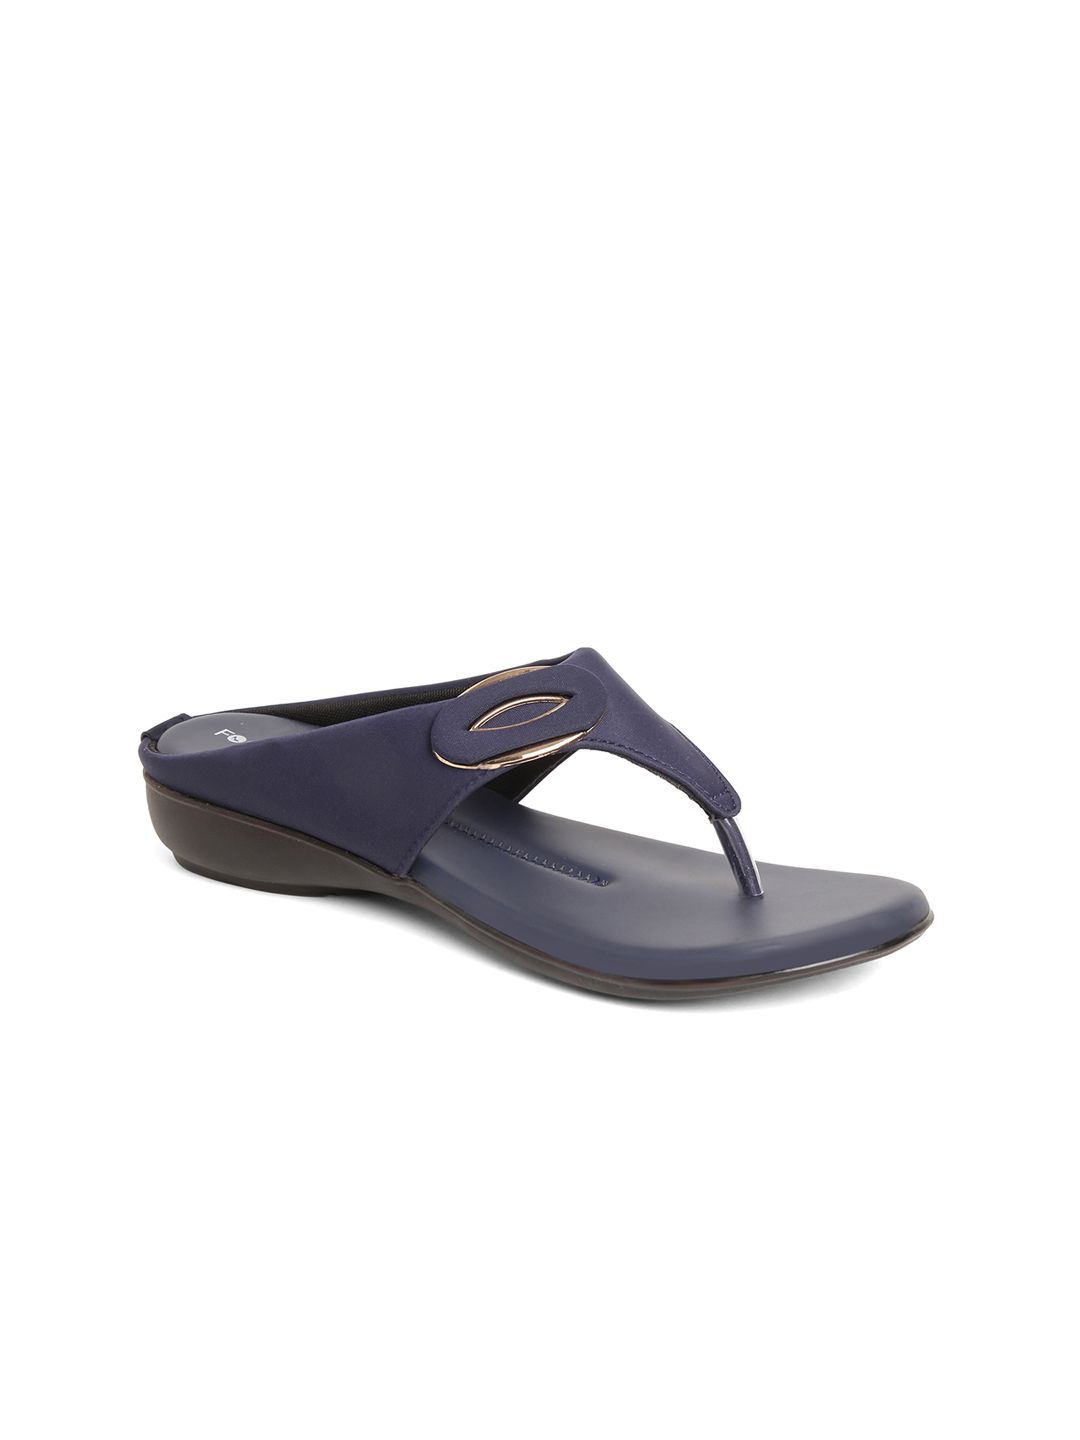 FOOTSOUL Women Blue T-Strap Flats with Buckles Price in India